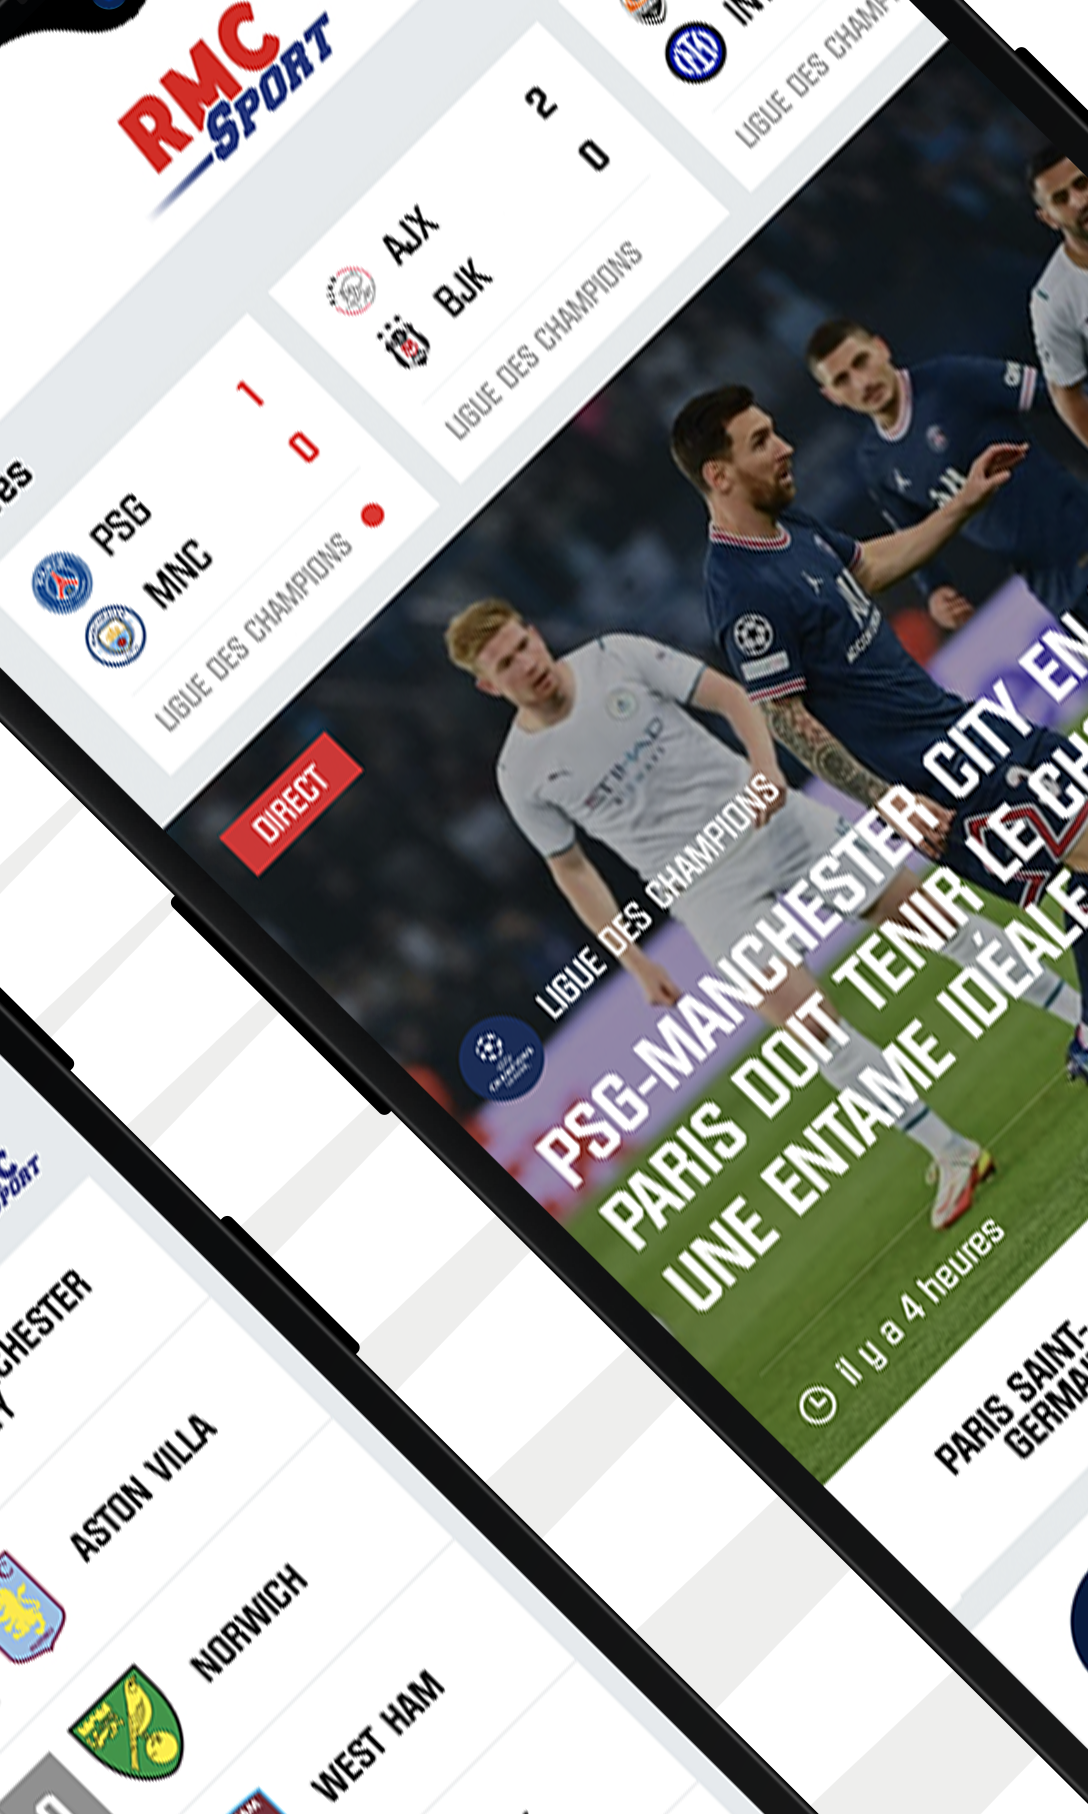 RMC Sport News, Résultats foot APK 5.8.0 for Android – Download RMC Sport  News, Résultats foot APK Latest Version from APKFab.com